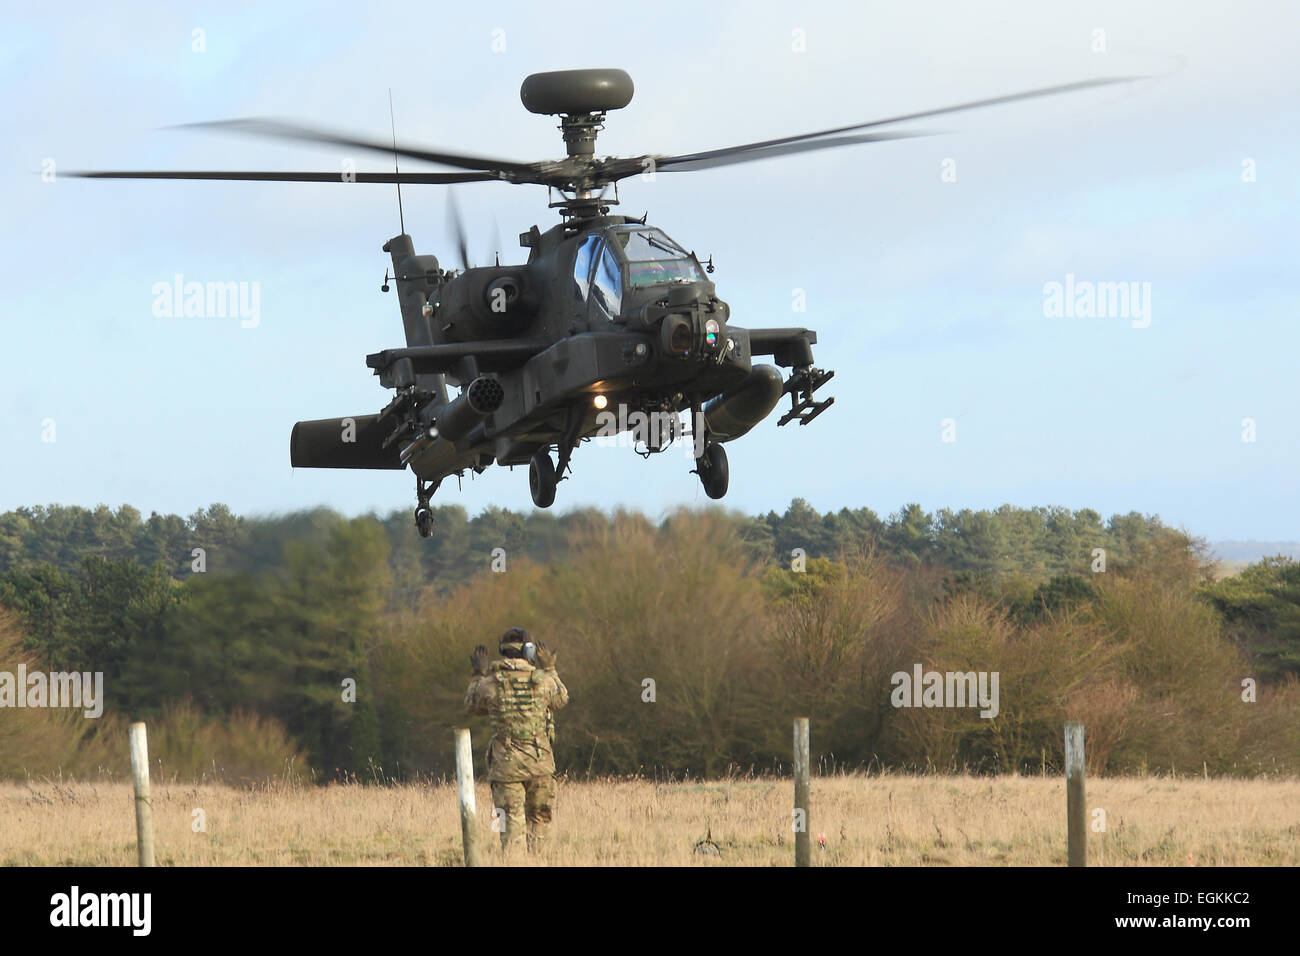 British Army Agusta Westland Apache AH1 attack helicopter lands in a field during a training exercise. Stock Photo